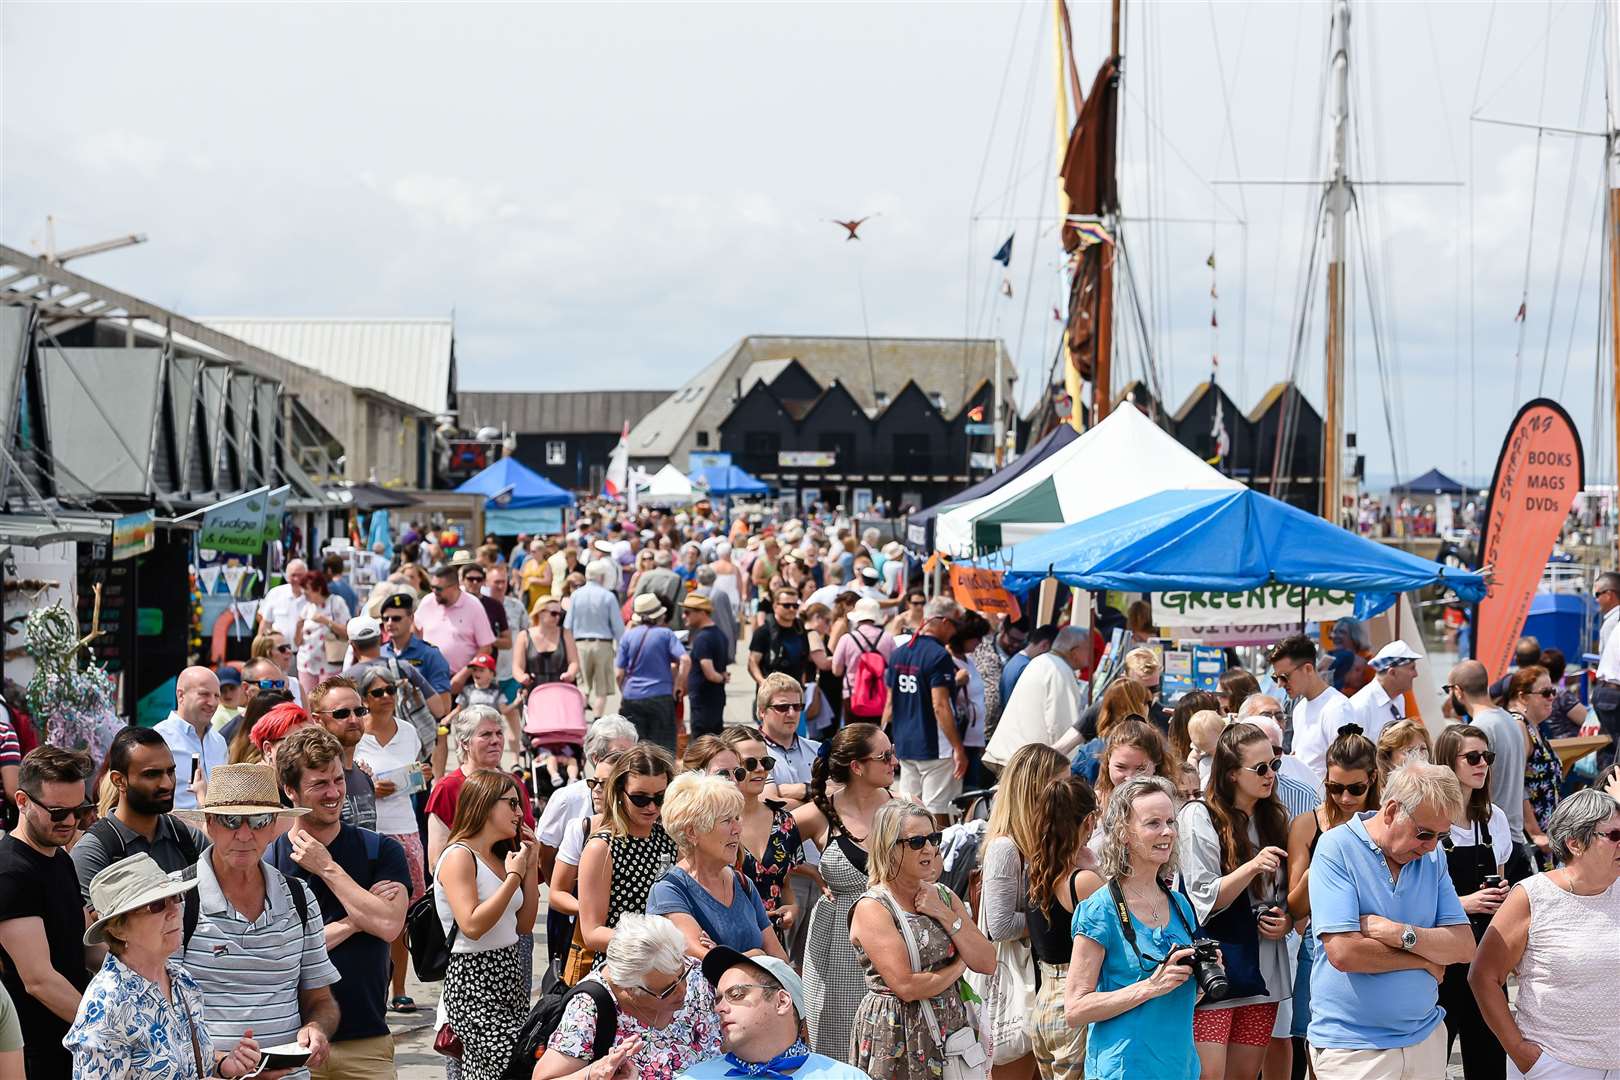 Whitstable is expected big crowds this summer - with its 4G coverage getting a shot in the arm over the coming weeks